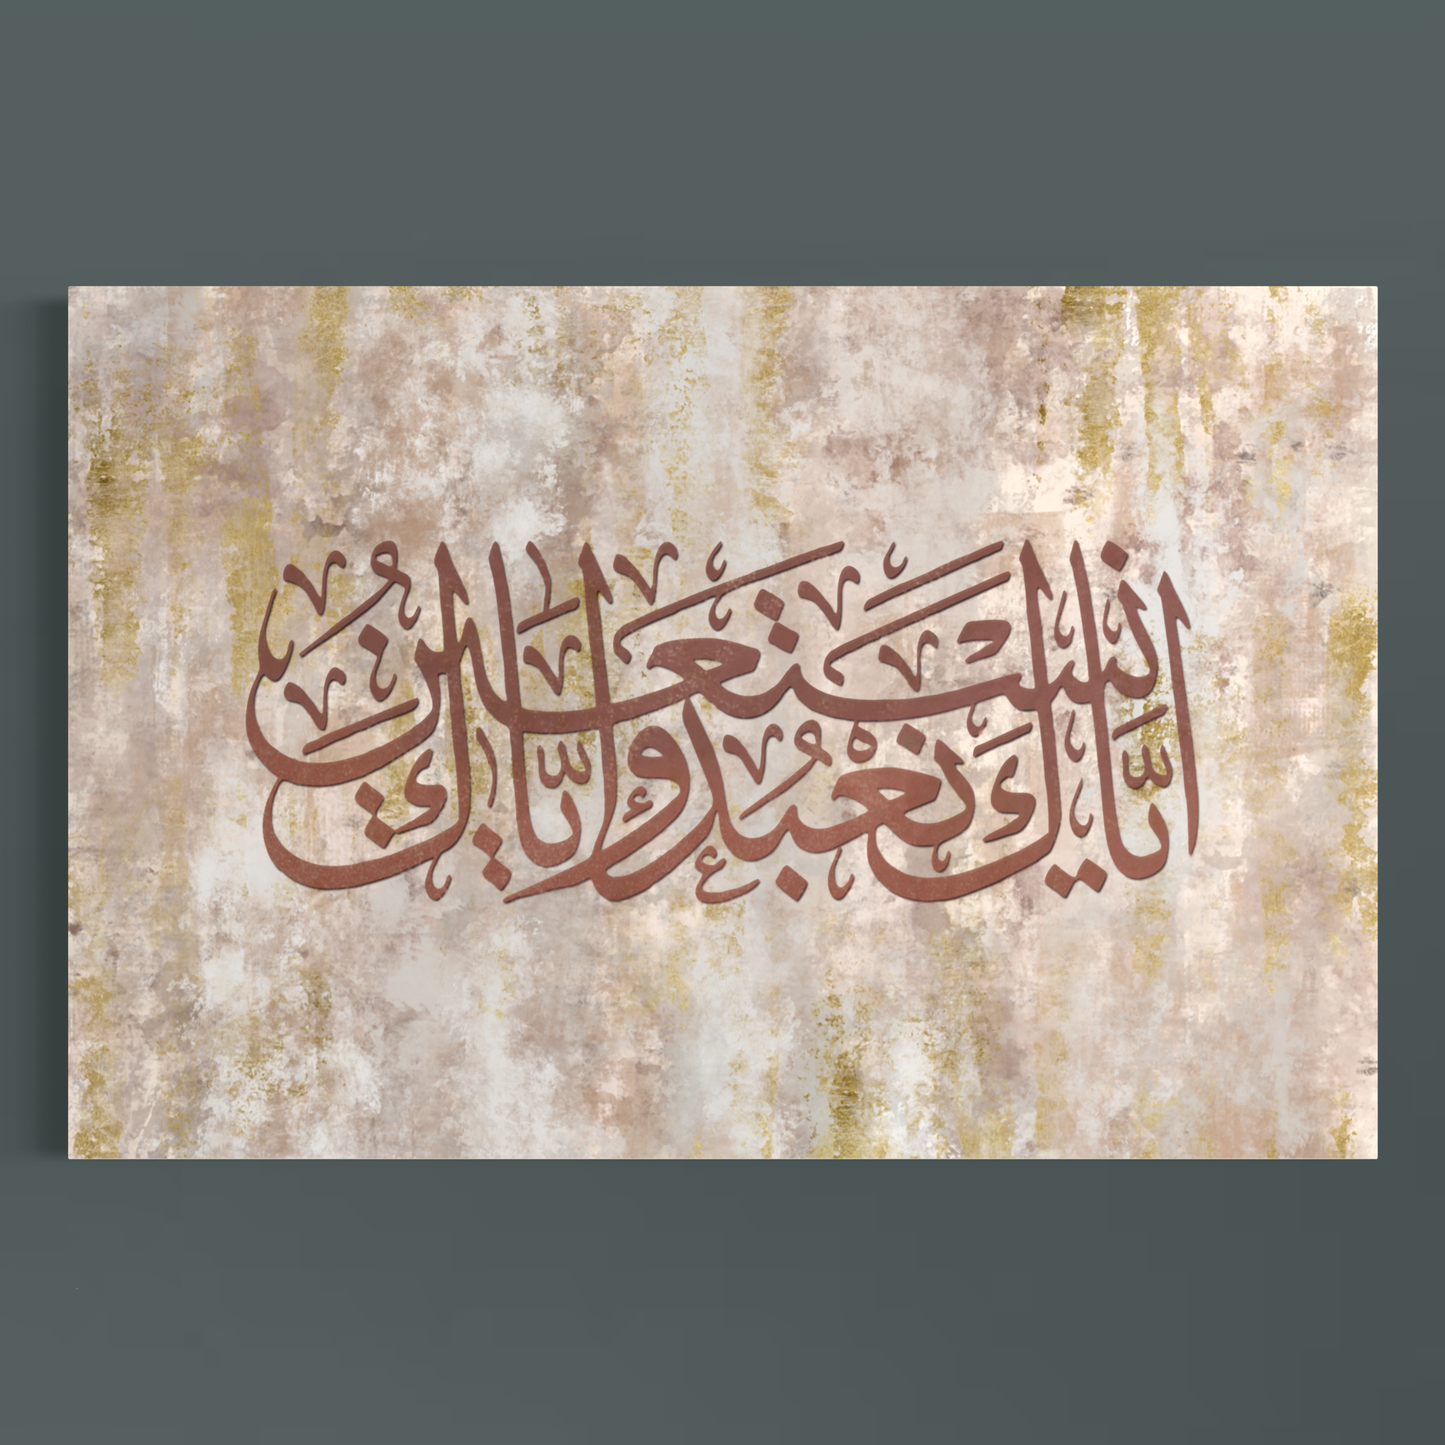 Sura Fatiha Ayah | | “You we worship and You we take refuge in” ll Modern neutral Color Islamic calligraphy prints